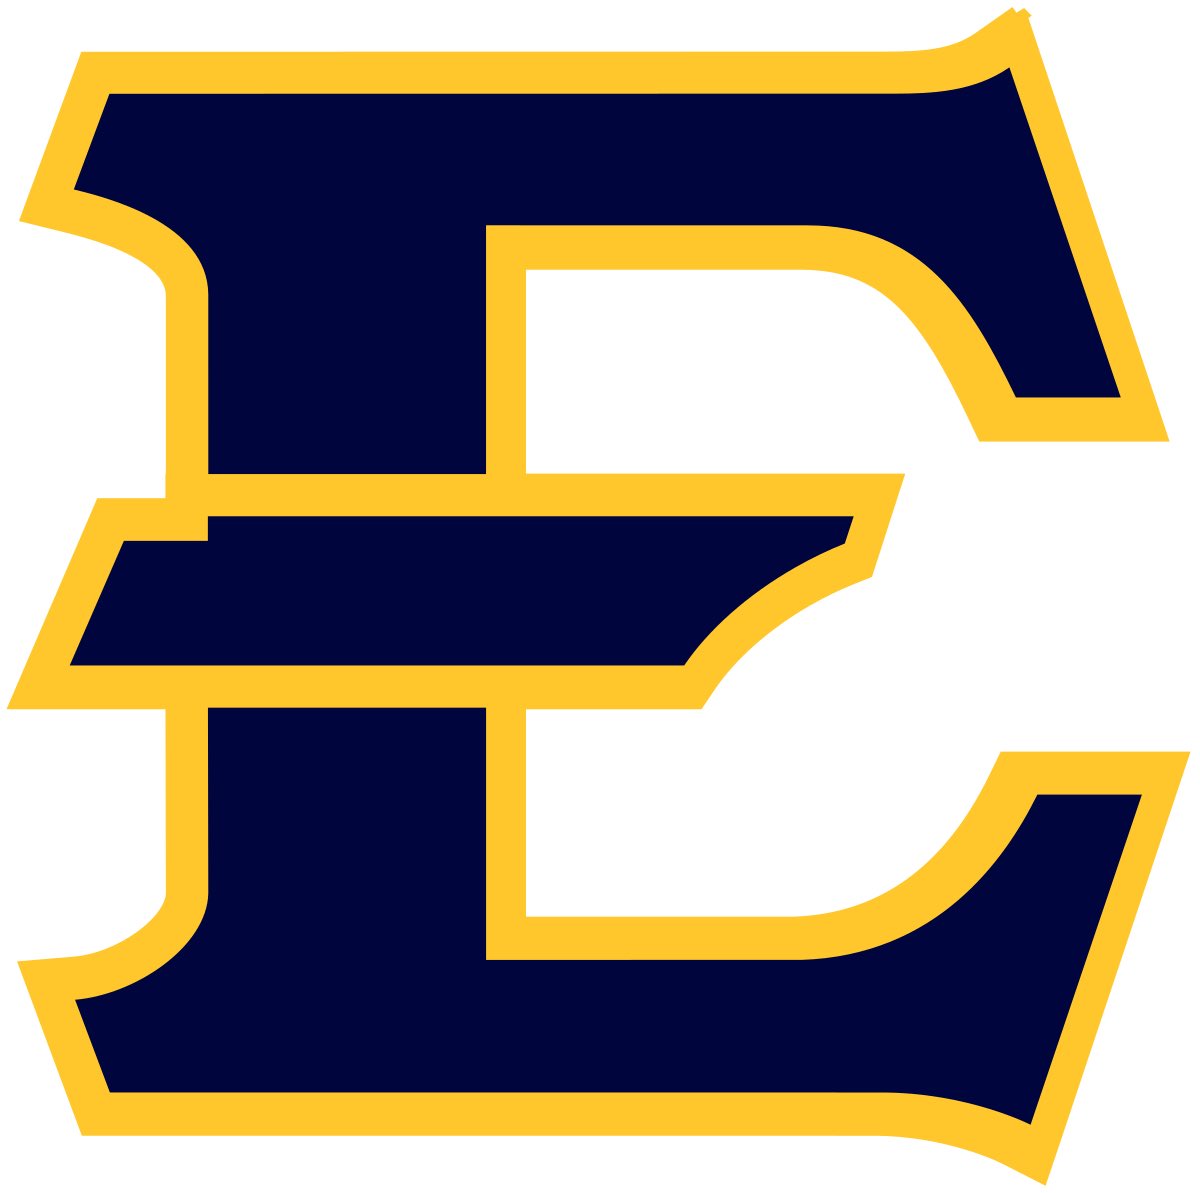 #AGTG after a great conversation with @jscelfo66 I am truly blessed to receive a D1 offer from @ETSUFootball. @CoachHunnicutt @RedElephant_FB @JoshNiblett @CoachALindsey @GHS_RIVERA